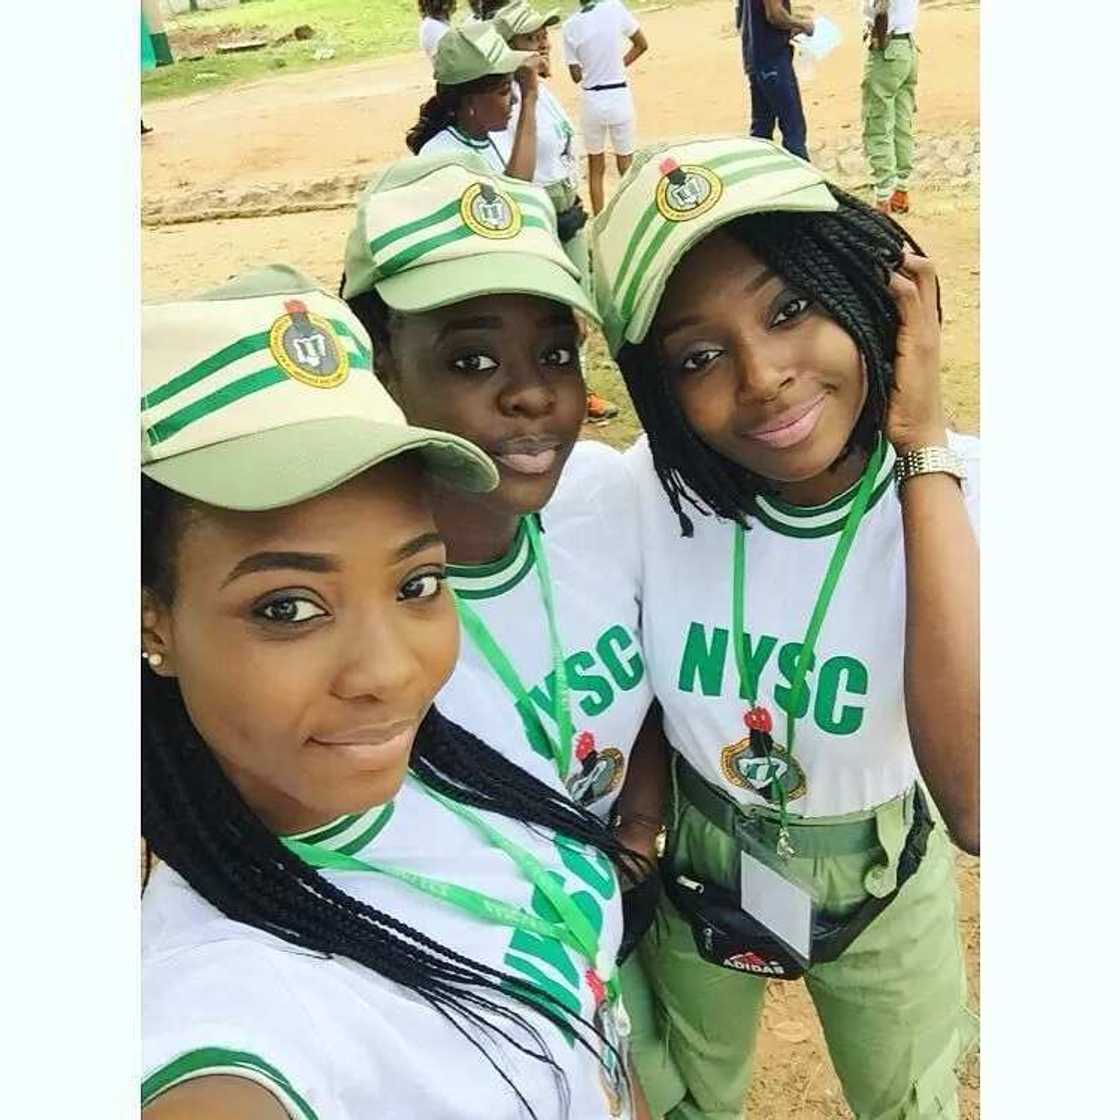 The NYSC Has 100% Of Beautiful Ladies (PHOTOS)